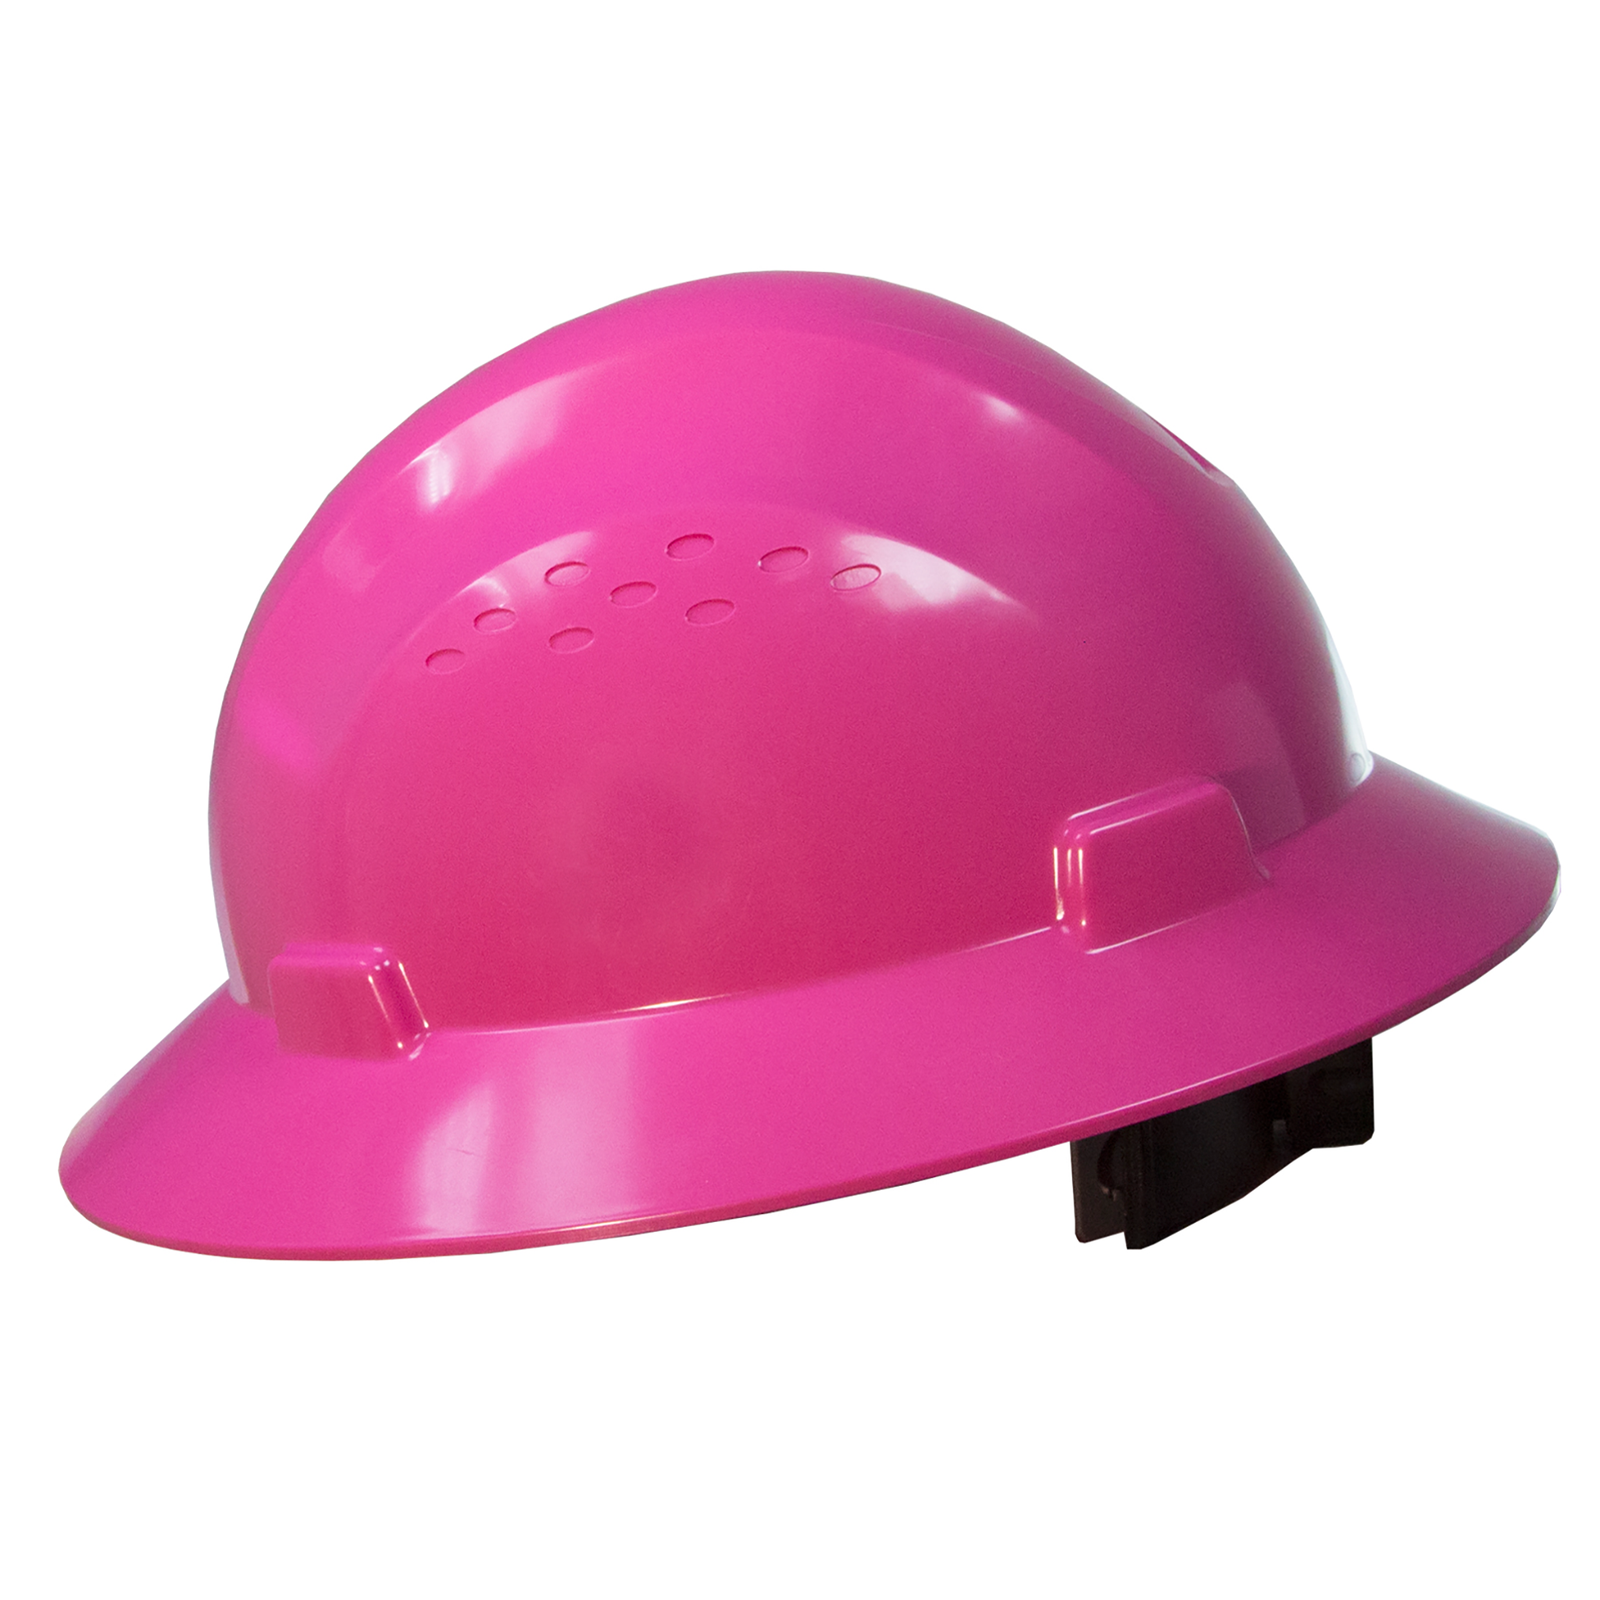 Full brim safety HDPE pink hard hat with 4 point suspension